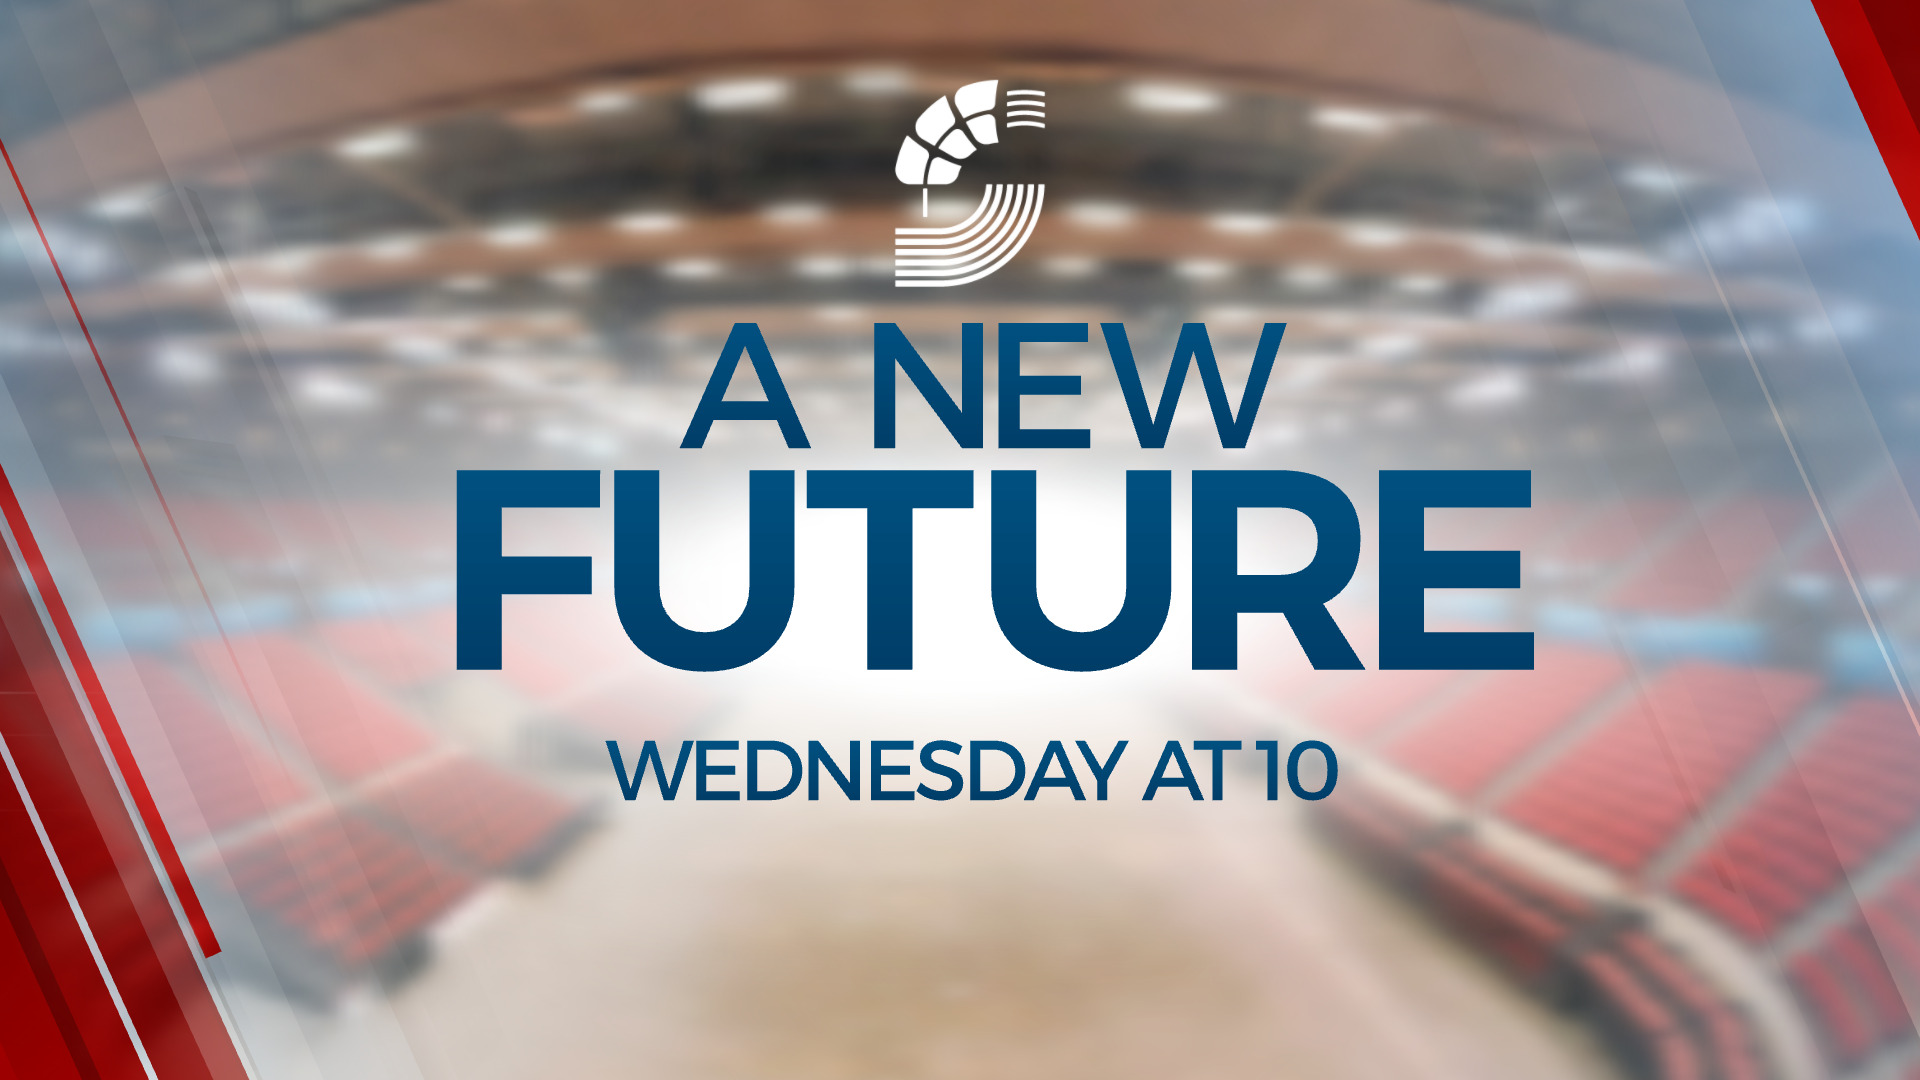 A New Future: Wednesday At 10